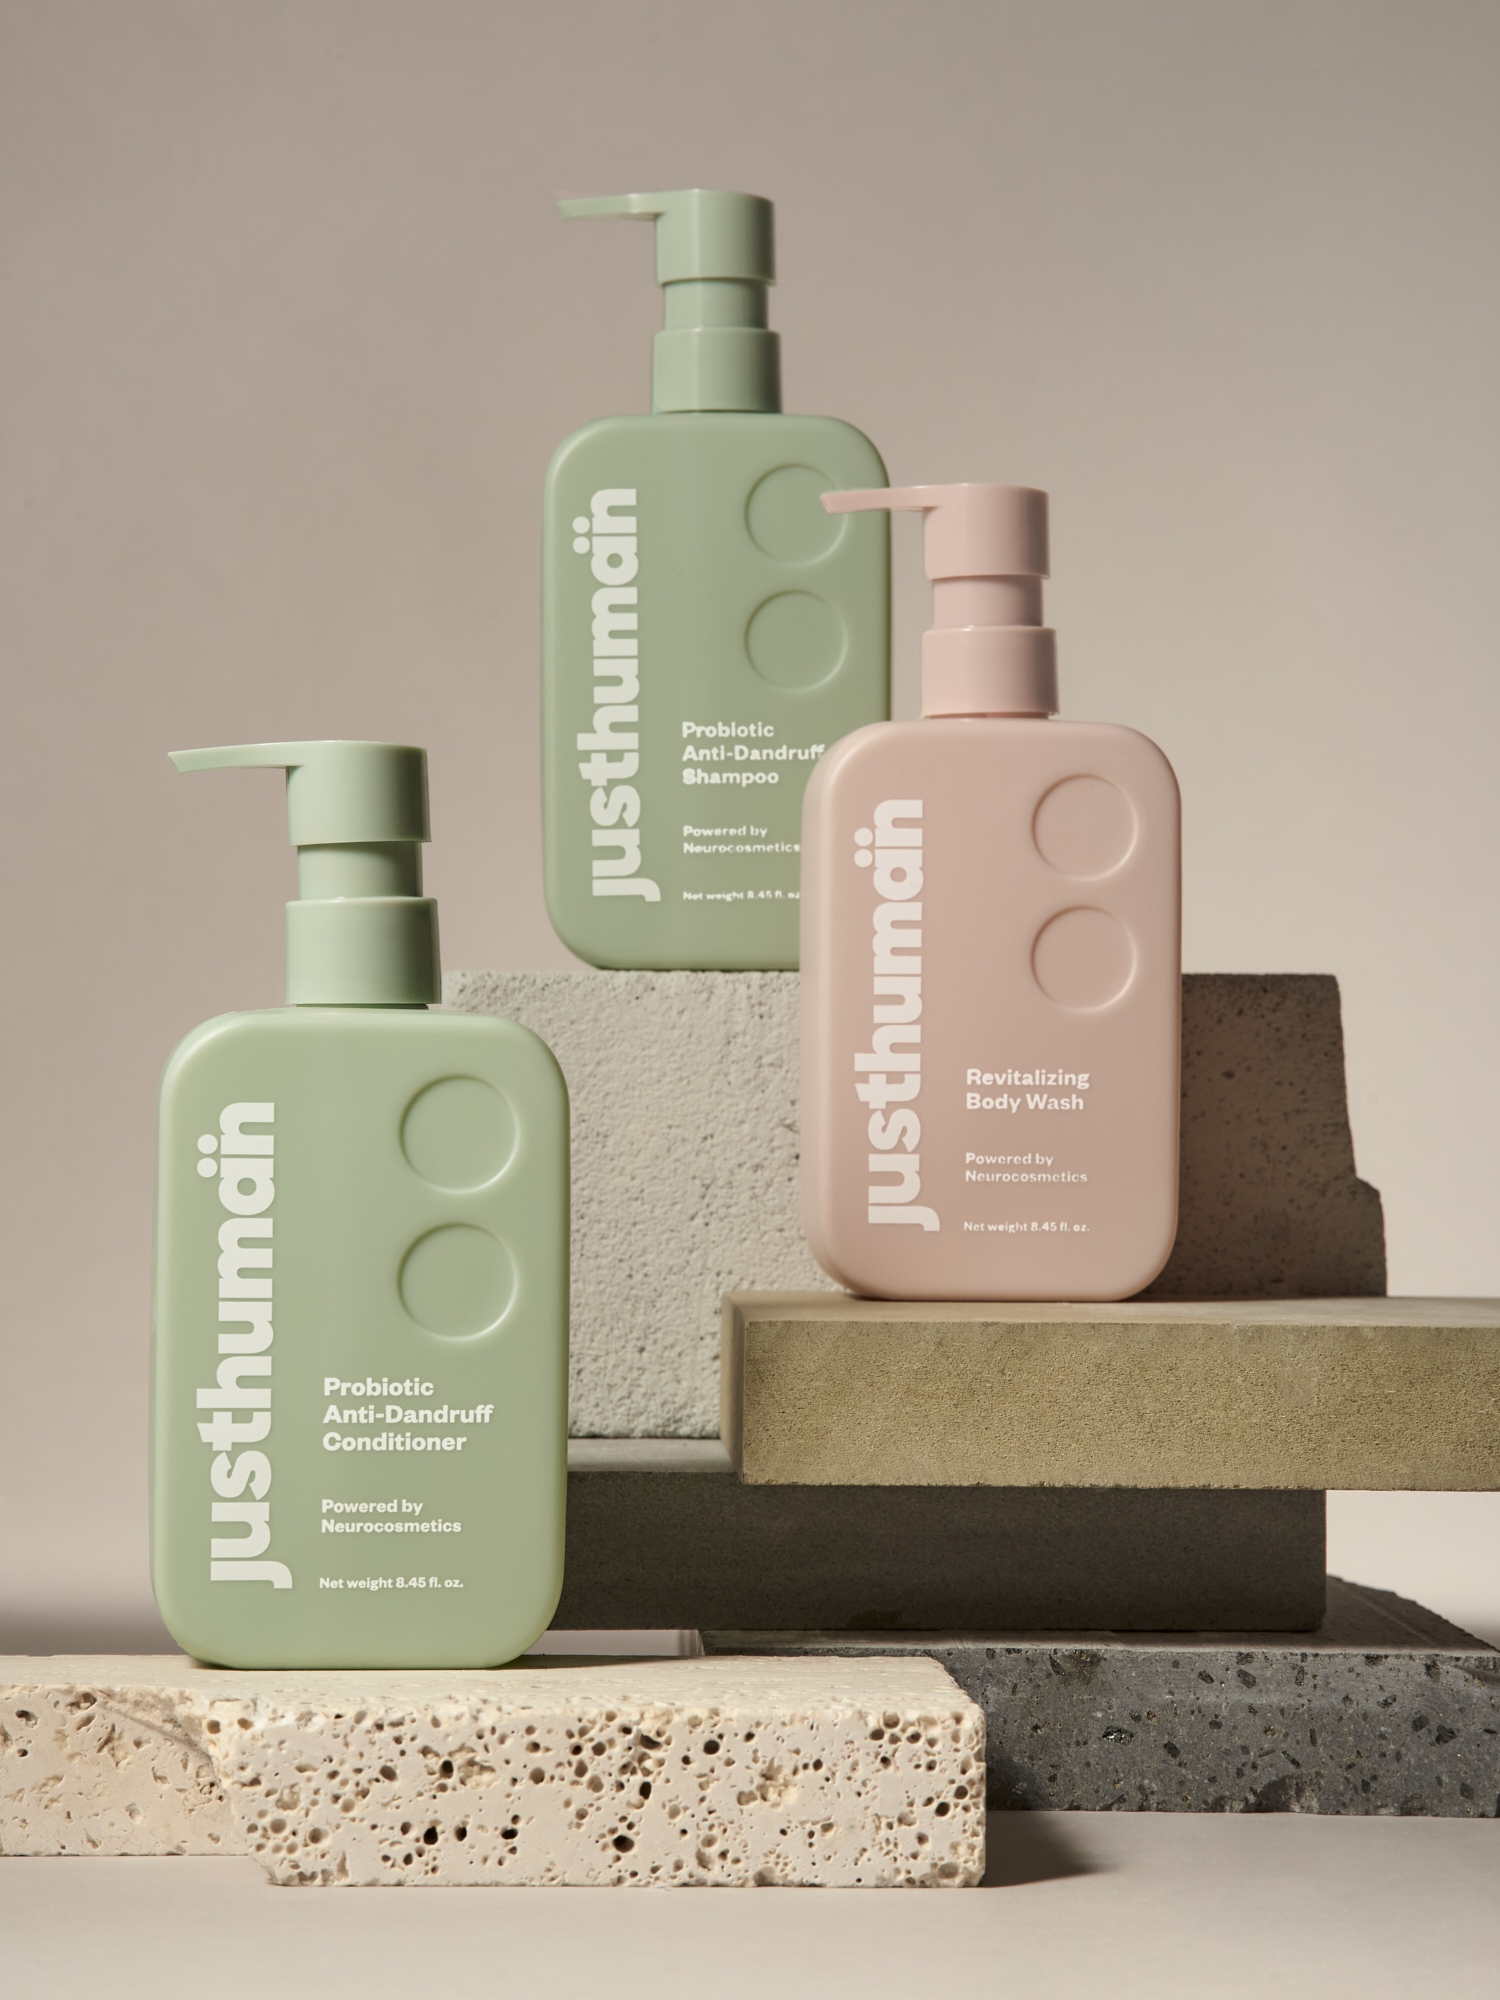 Justhuman launches in India & the USA ushering in a new generation of clean beauty products, powered by Neurocosmetics